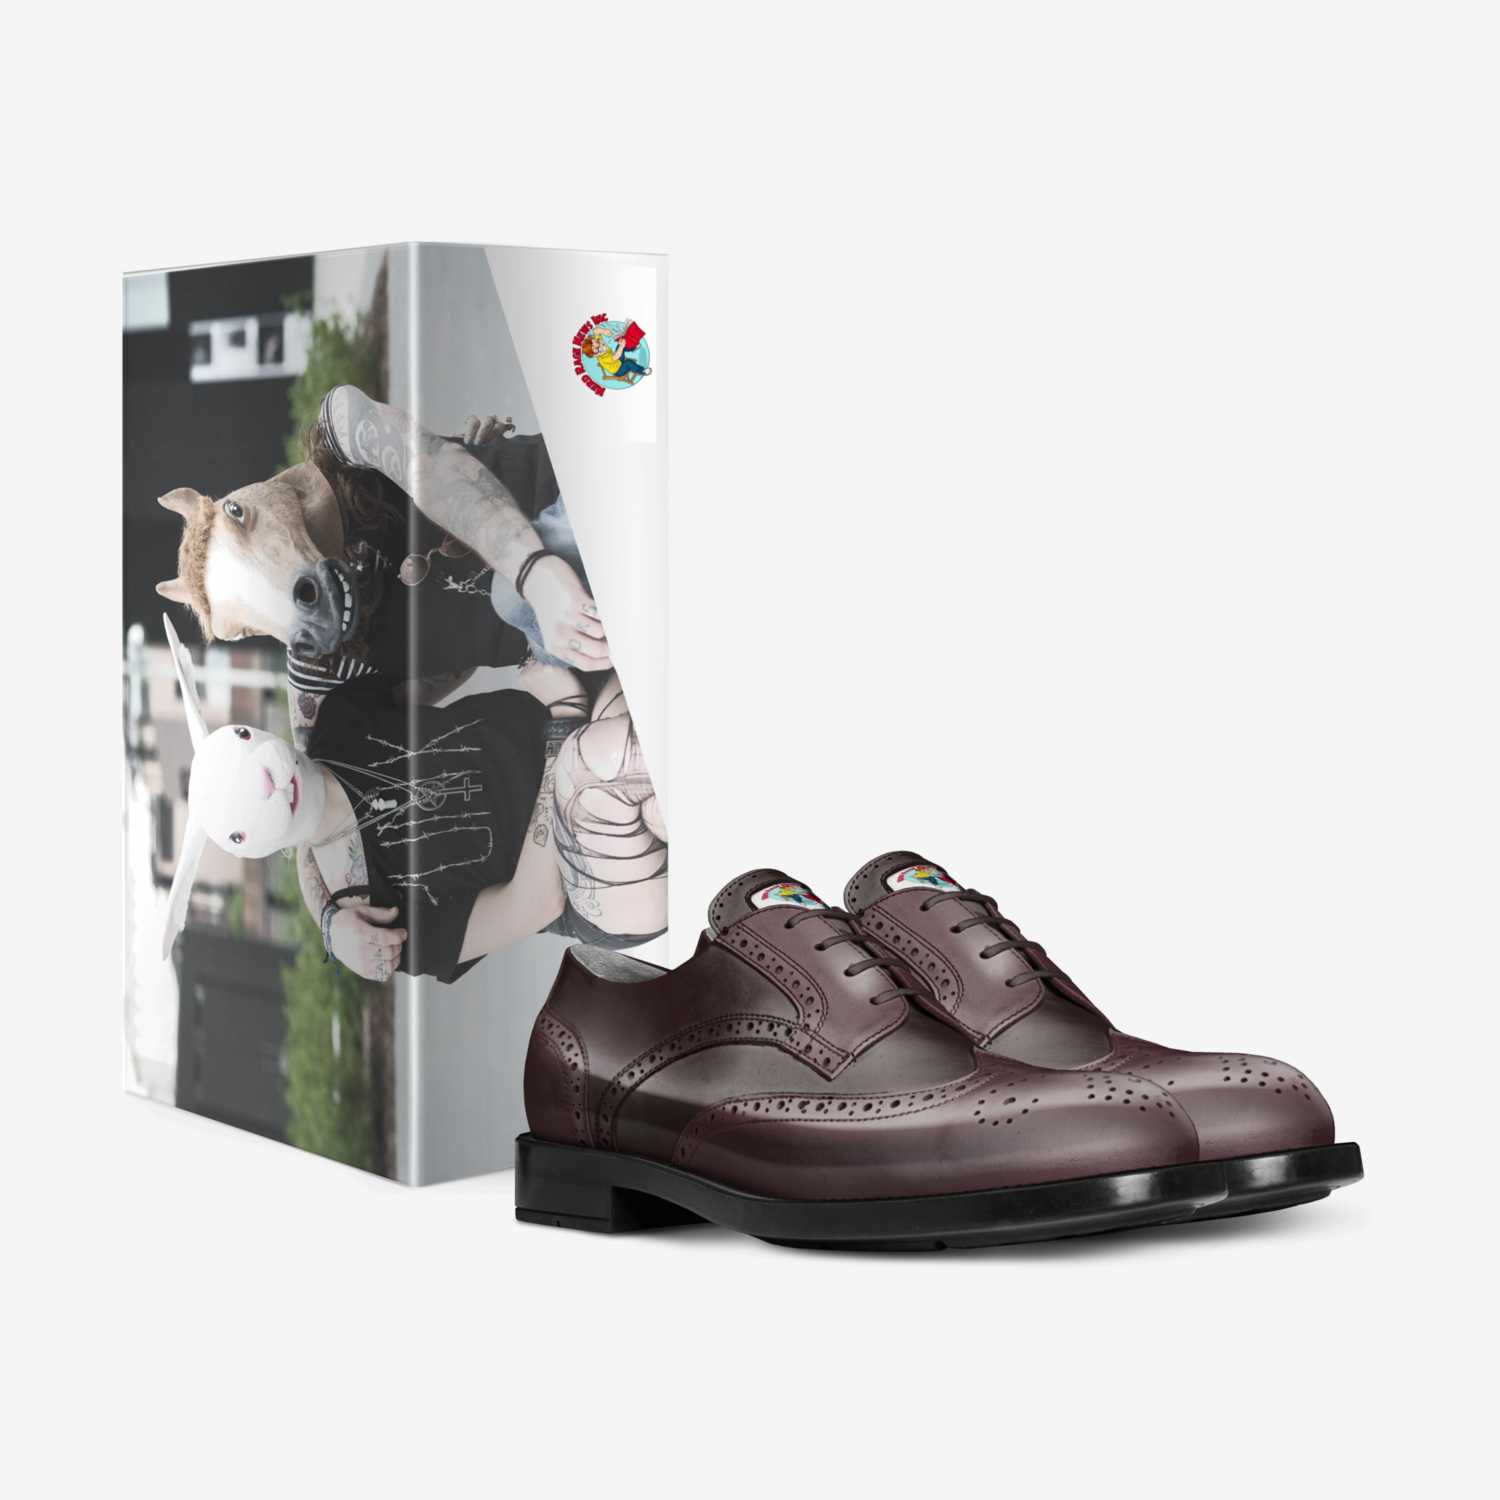 Nerd Professional custom made in Italy shoes by Steve Wollett | Box view